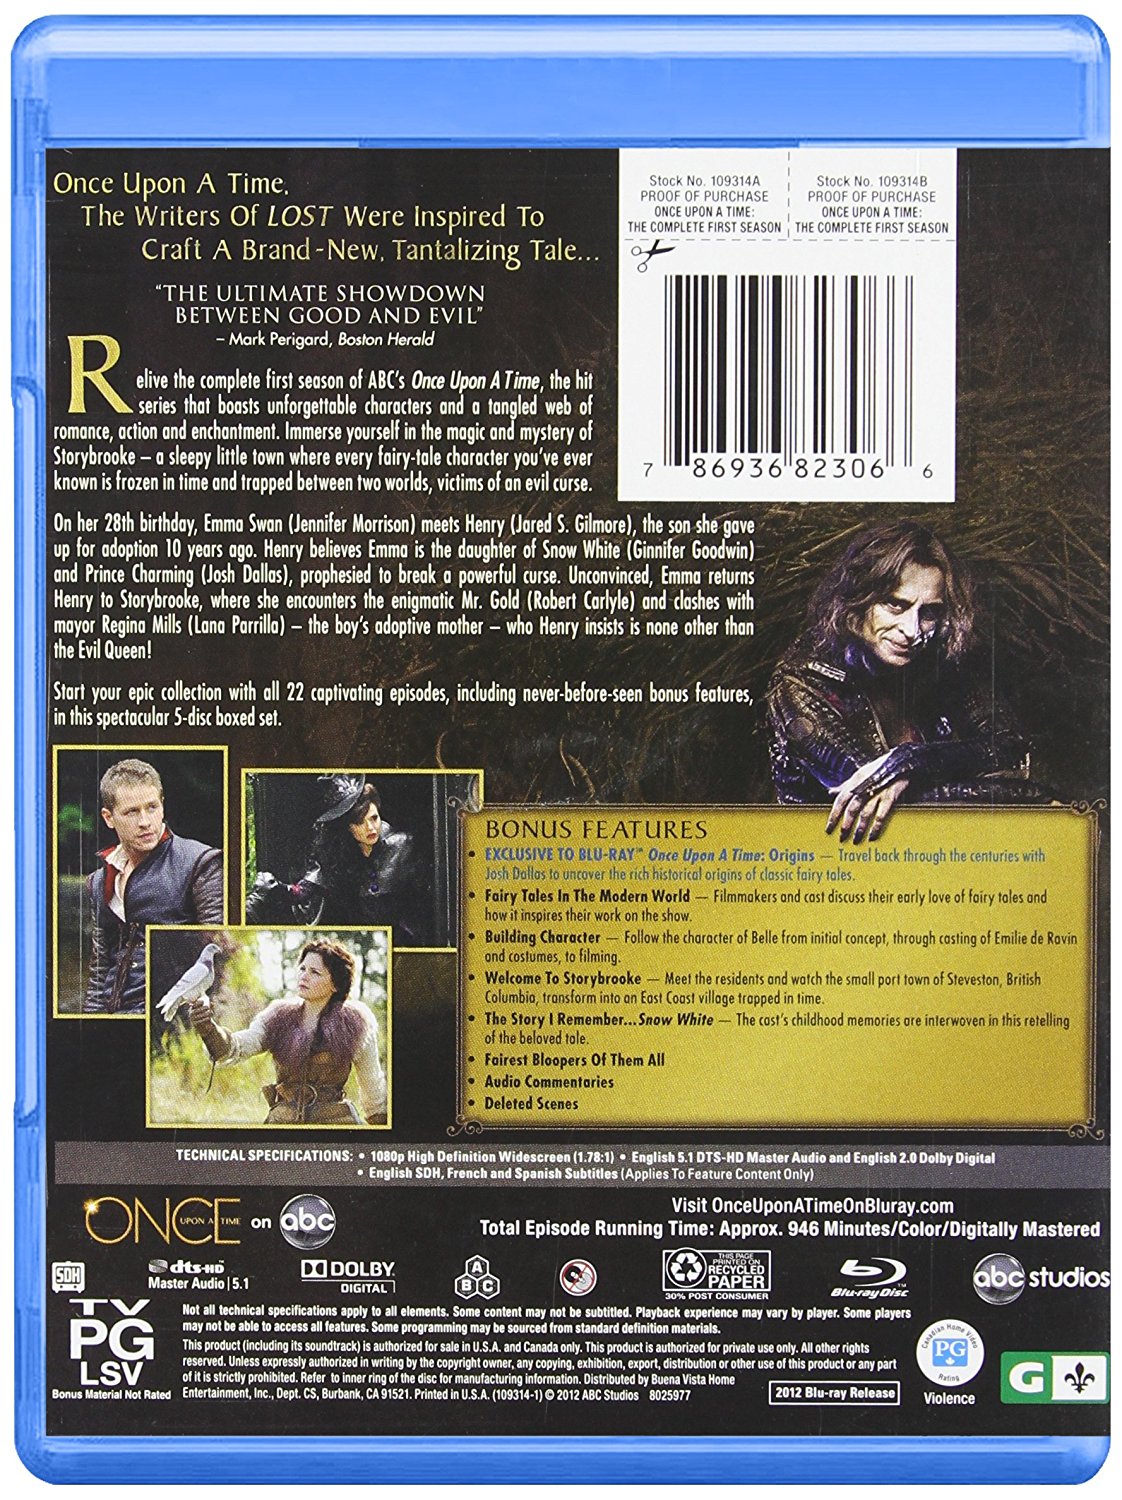 Once Upon a Time: The Complete First Season (Blu-ray) - image 2 of 2